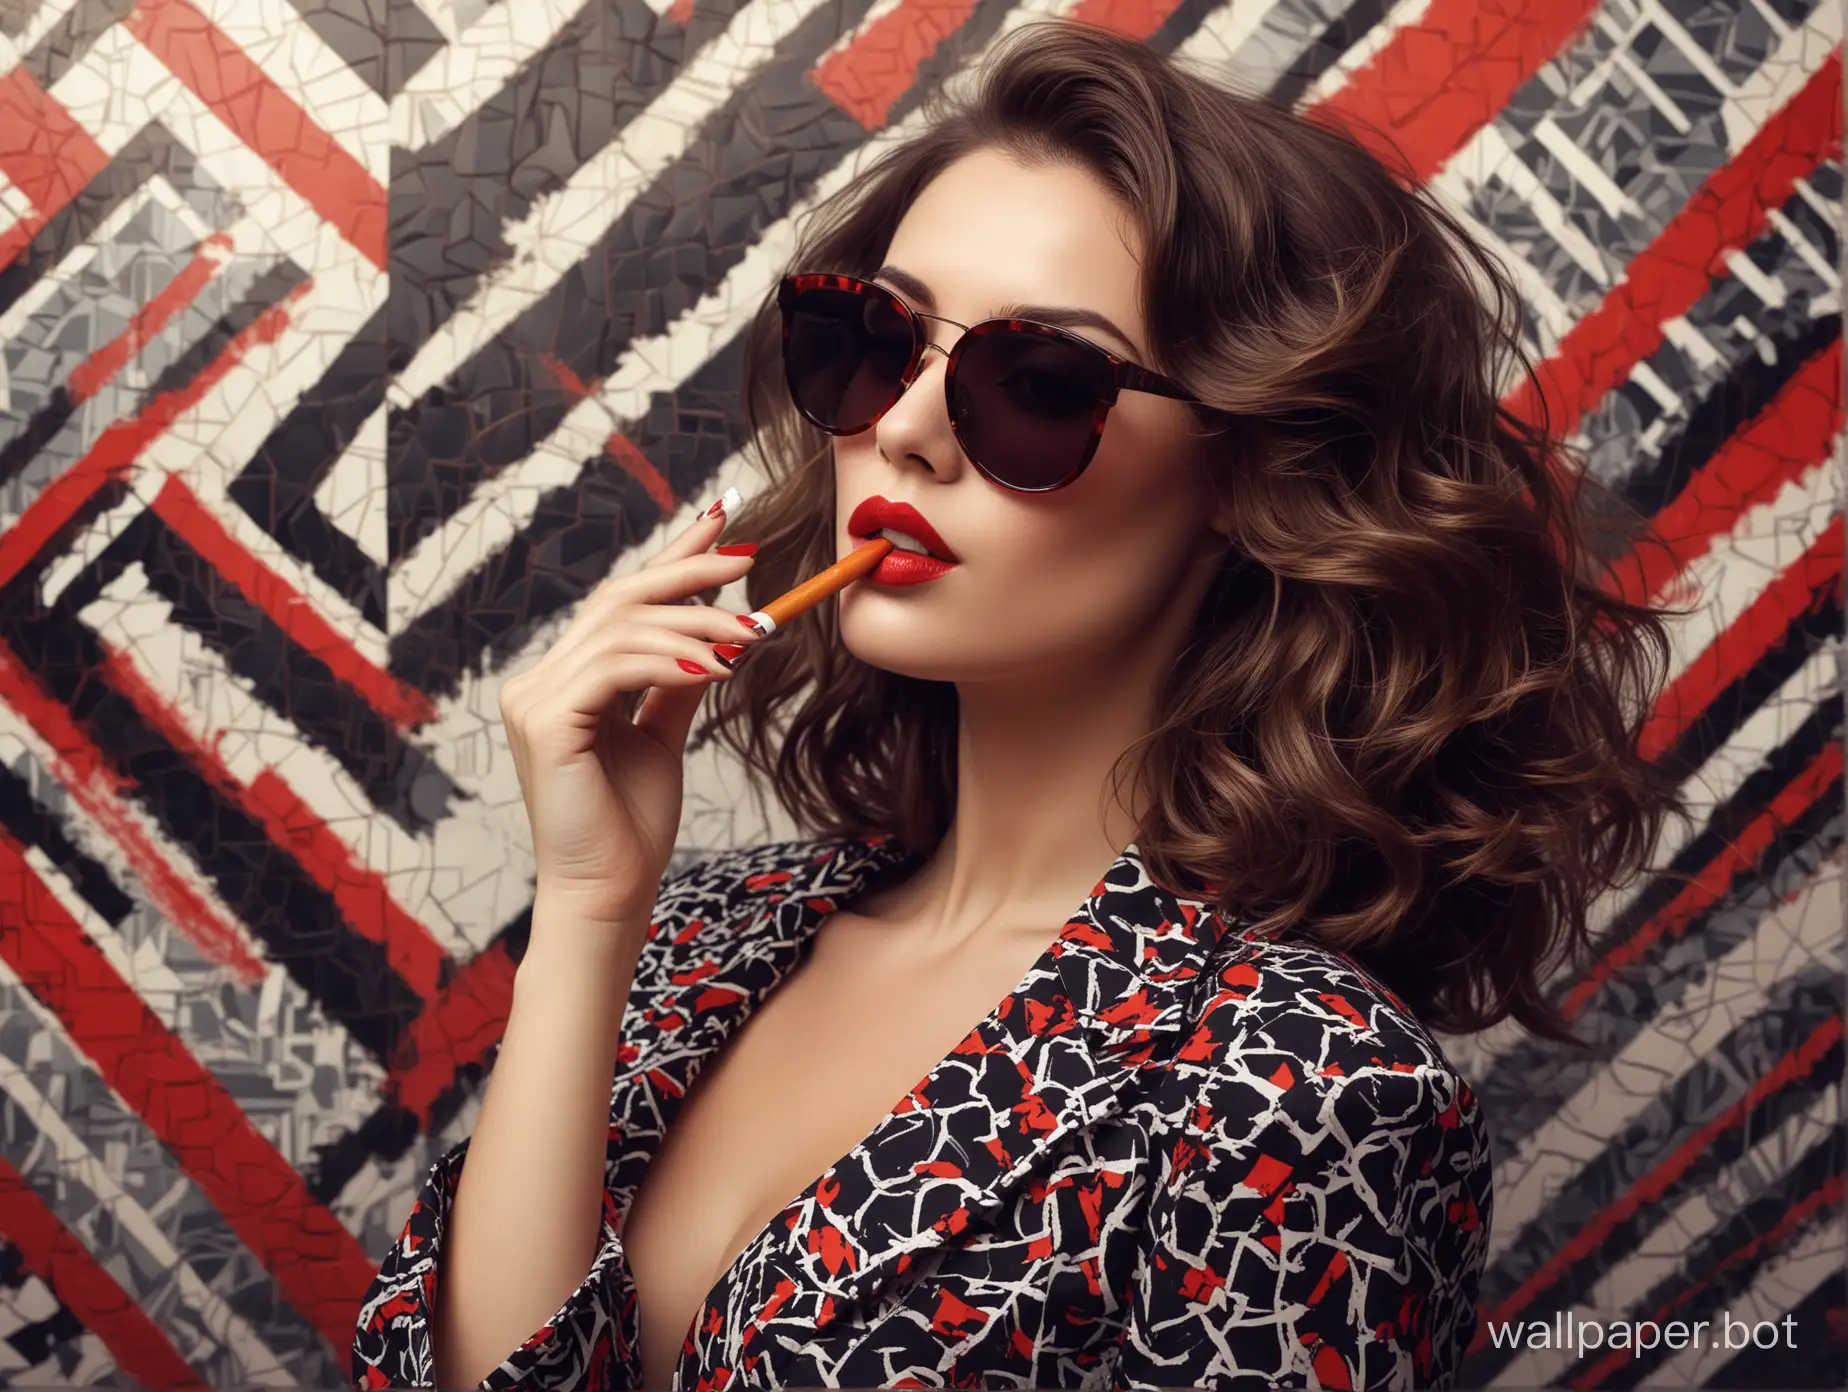 A stylish portrait of a brunette woman donning chic sunglasses, wearing vibrant red lipstick, and casually smoking a cigarette. Her hair is styled in loose waves, and she exudes a confident and alluring aura. The background is a blend of abstract patterns and geometric shapes, creating a visually dynamic and modern atmosphere.